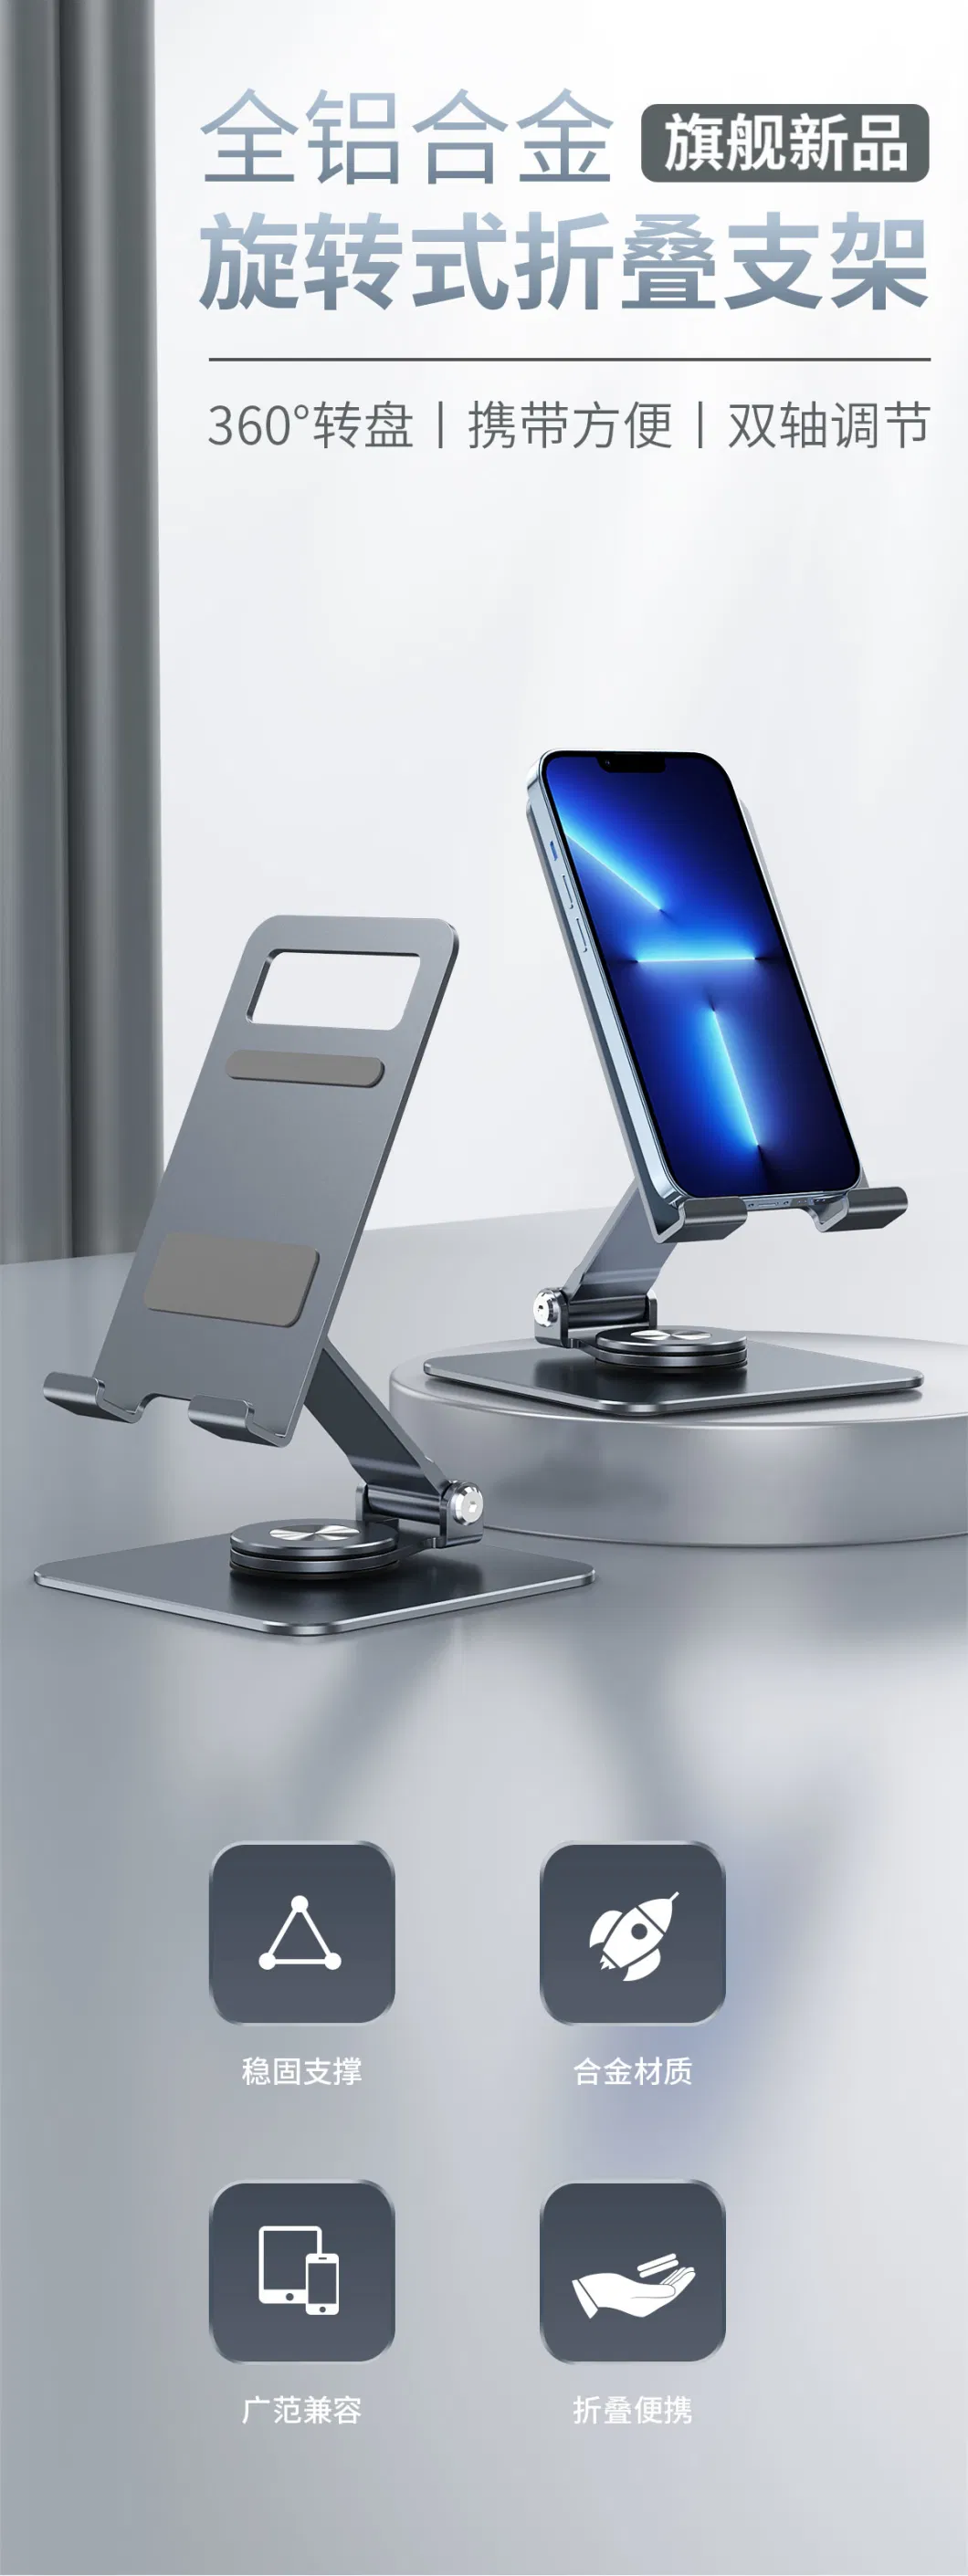 Metal Desktop Tablet Holder Table Cell Foldable Extend Support Desk Mobile Phone Holder 360 Degree Rotatable Stand for iPhone iPad Adjustable